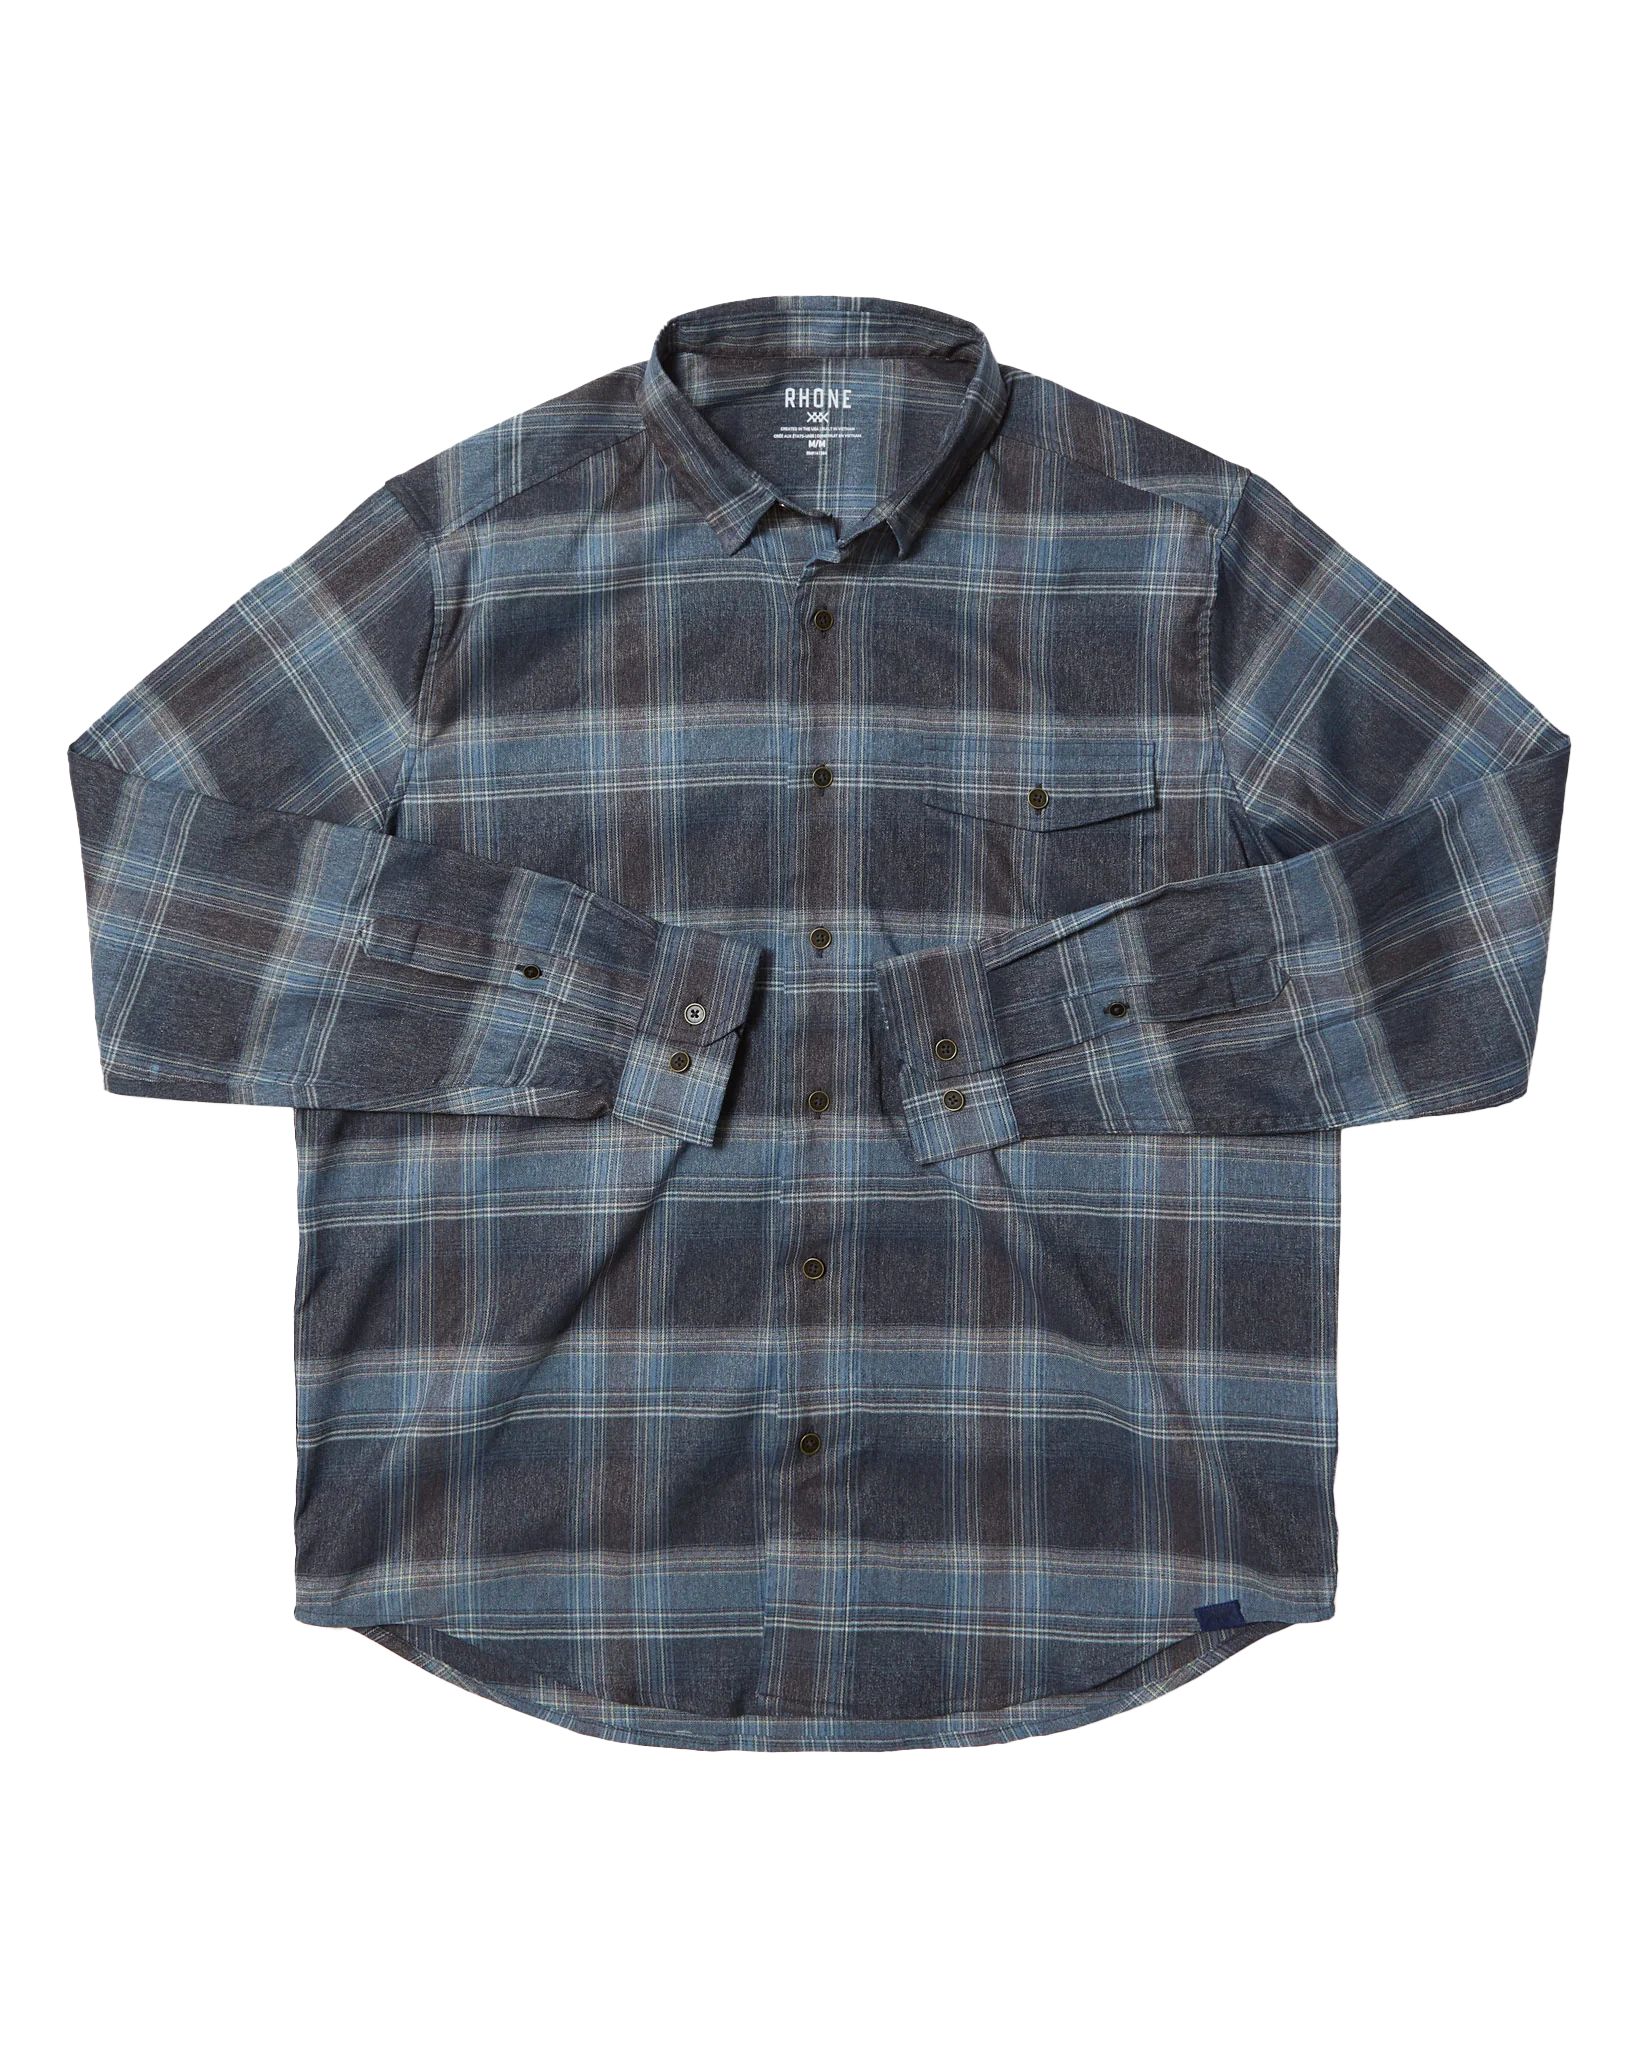 Performance Flannel Button Down | Rhone (US)